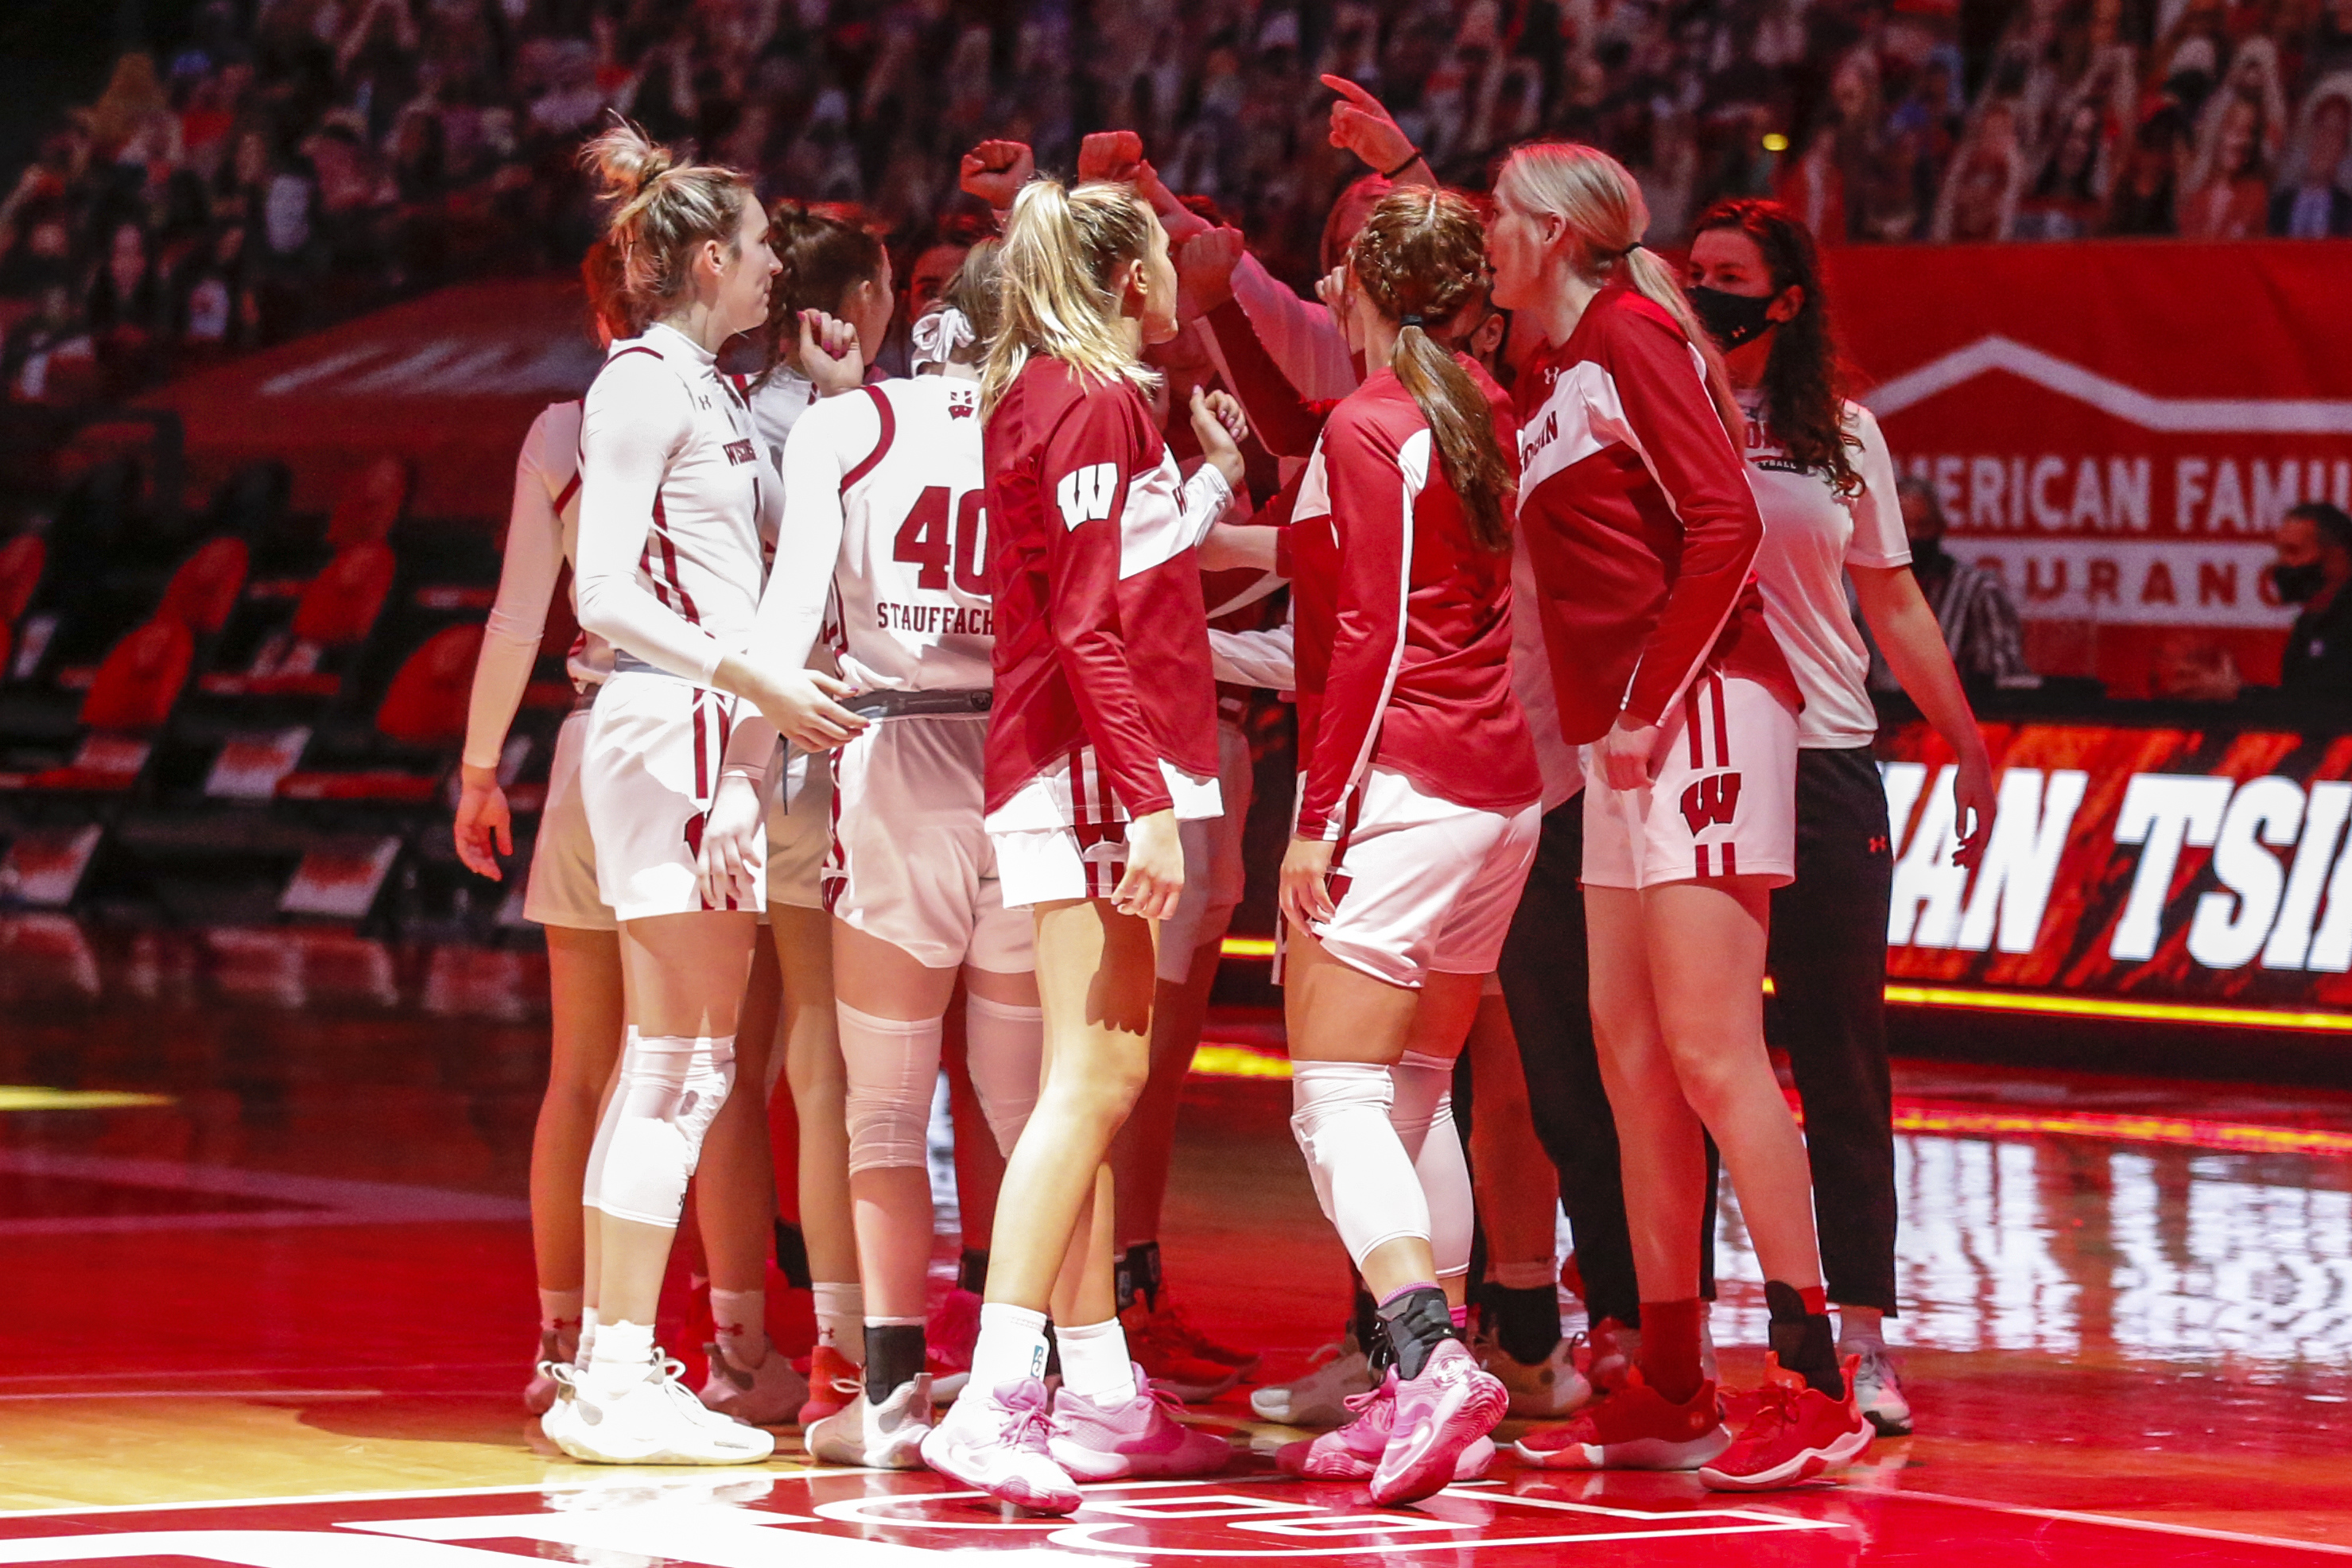 COLLEGE BASKETBALL: FEB 24 Women’s Indiana at Wisconsin